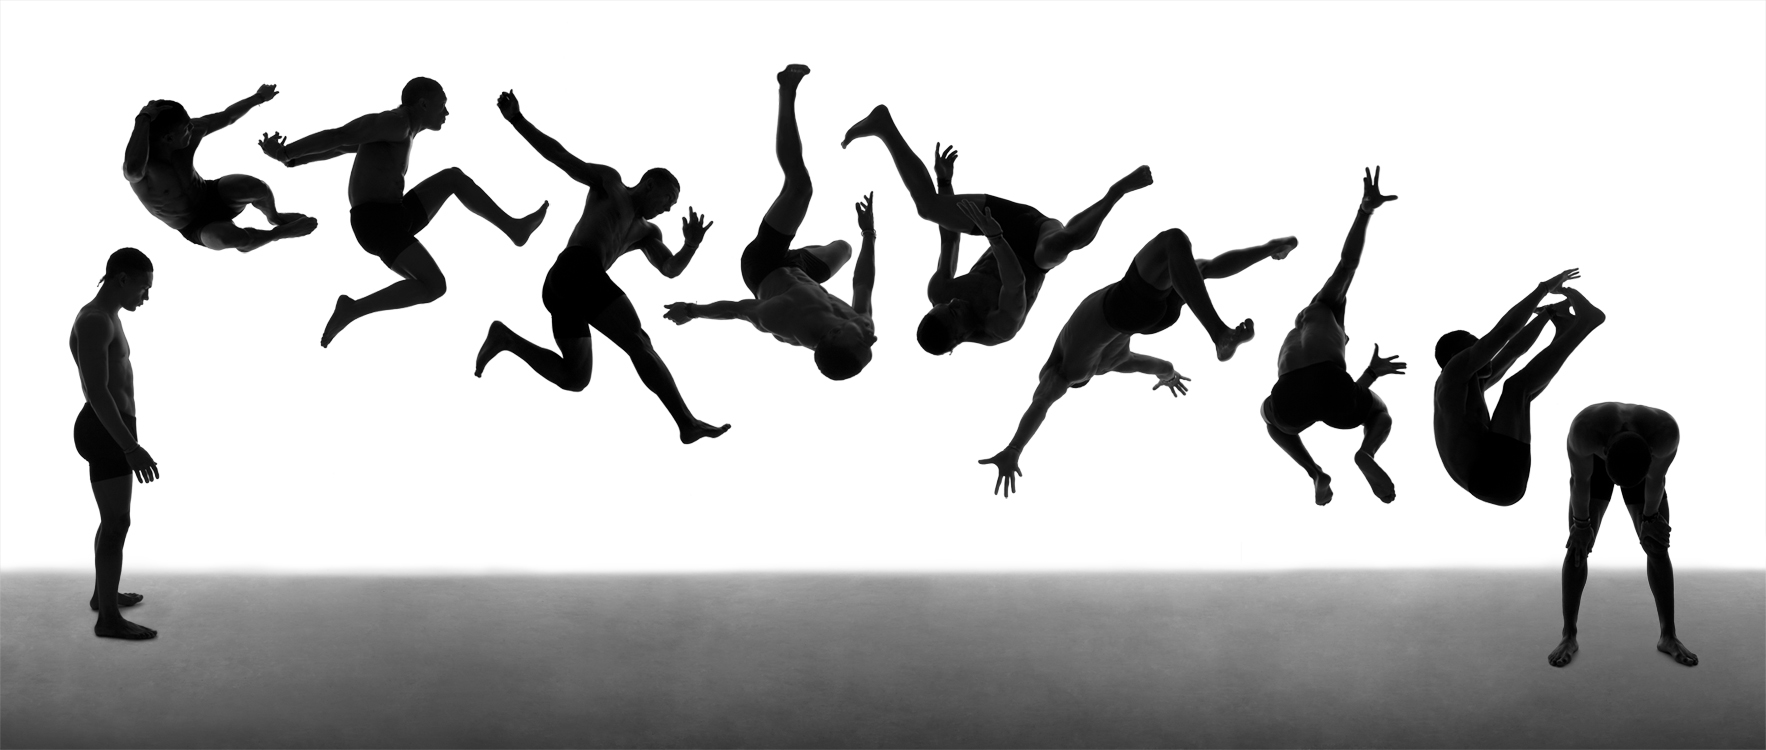 Black and White Photography: Dancers in the Dark | HuffPost